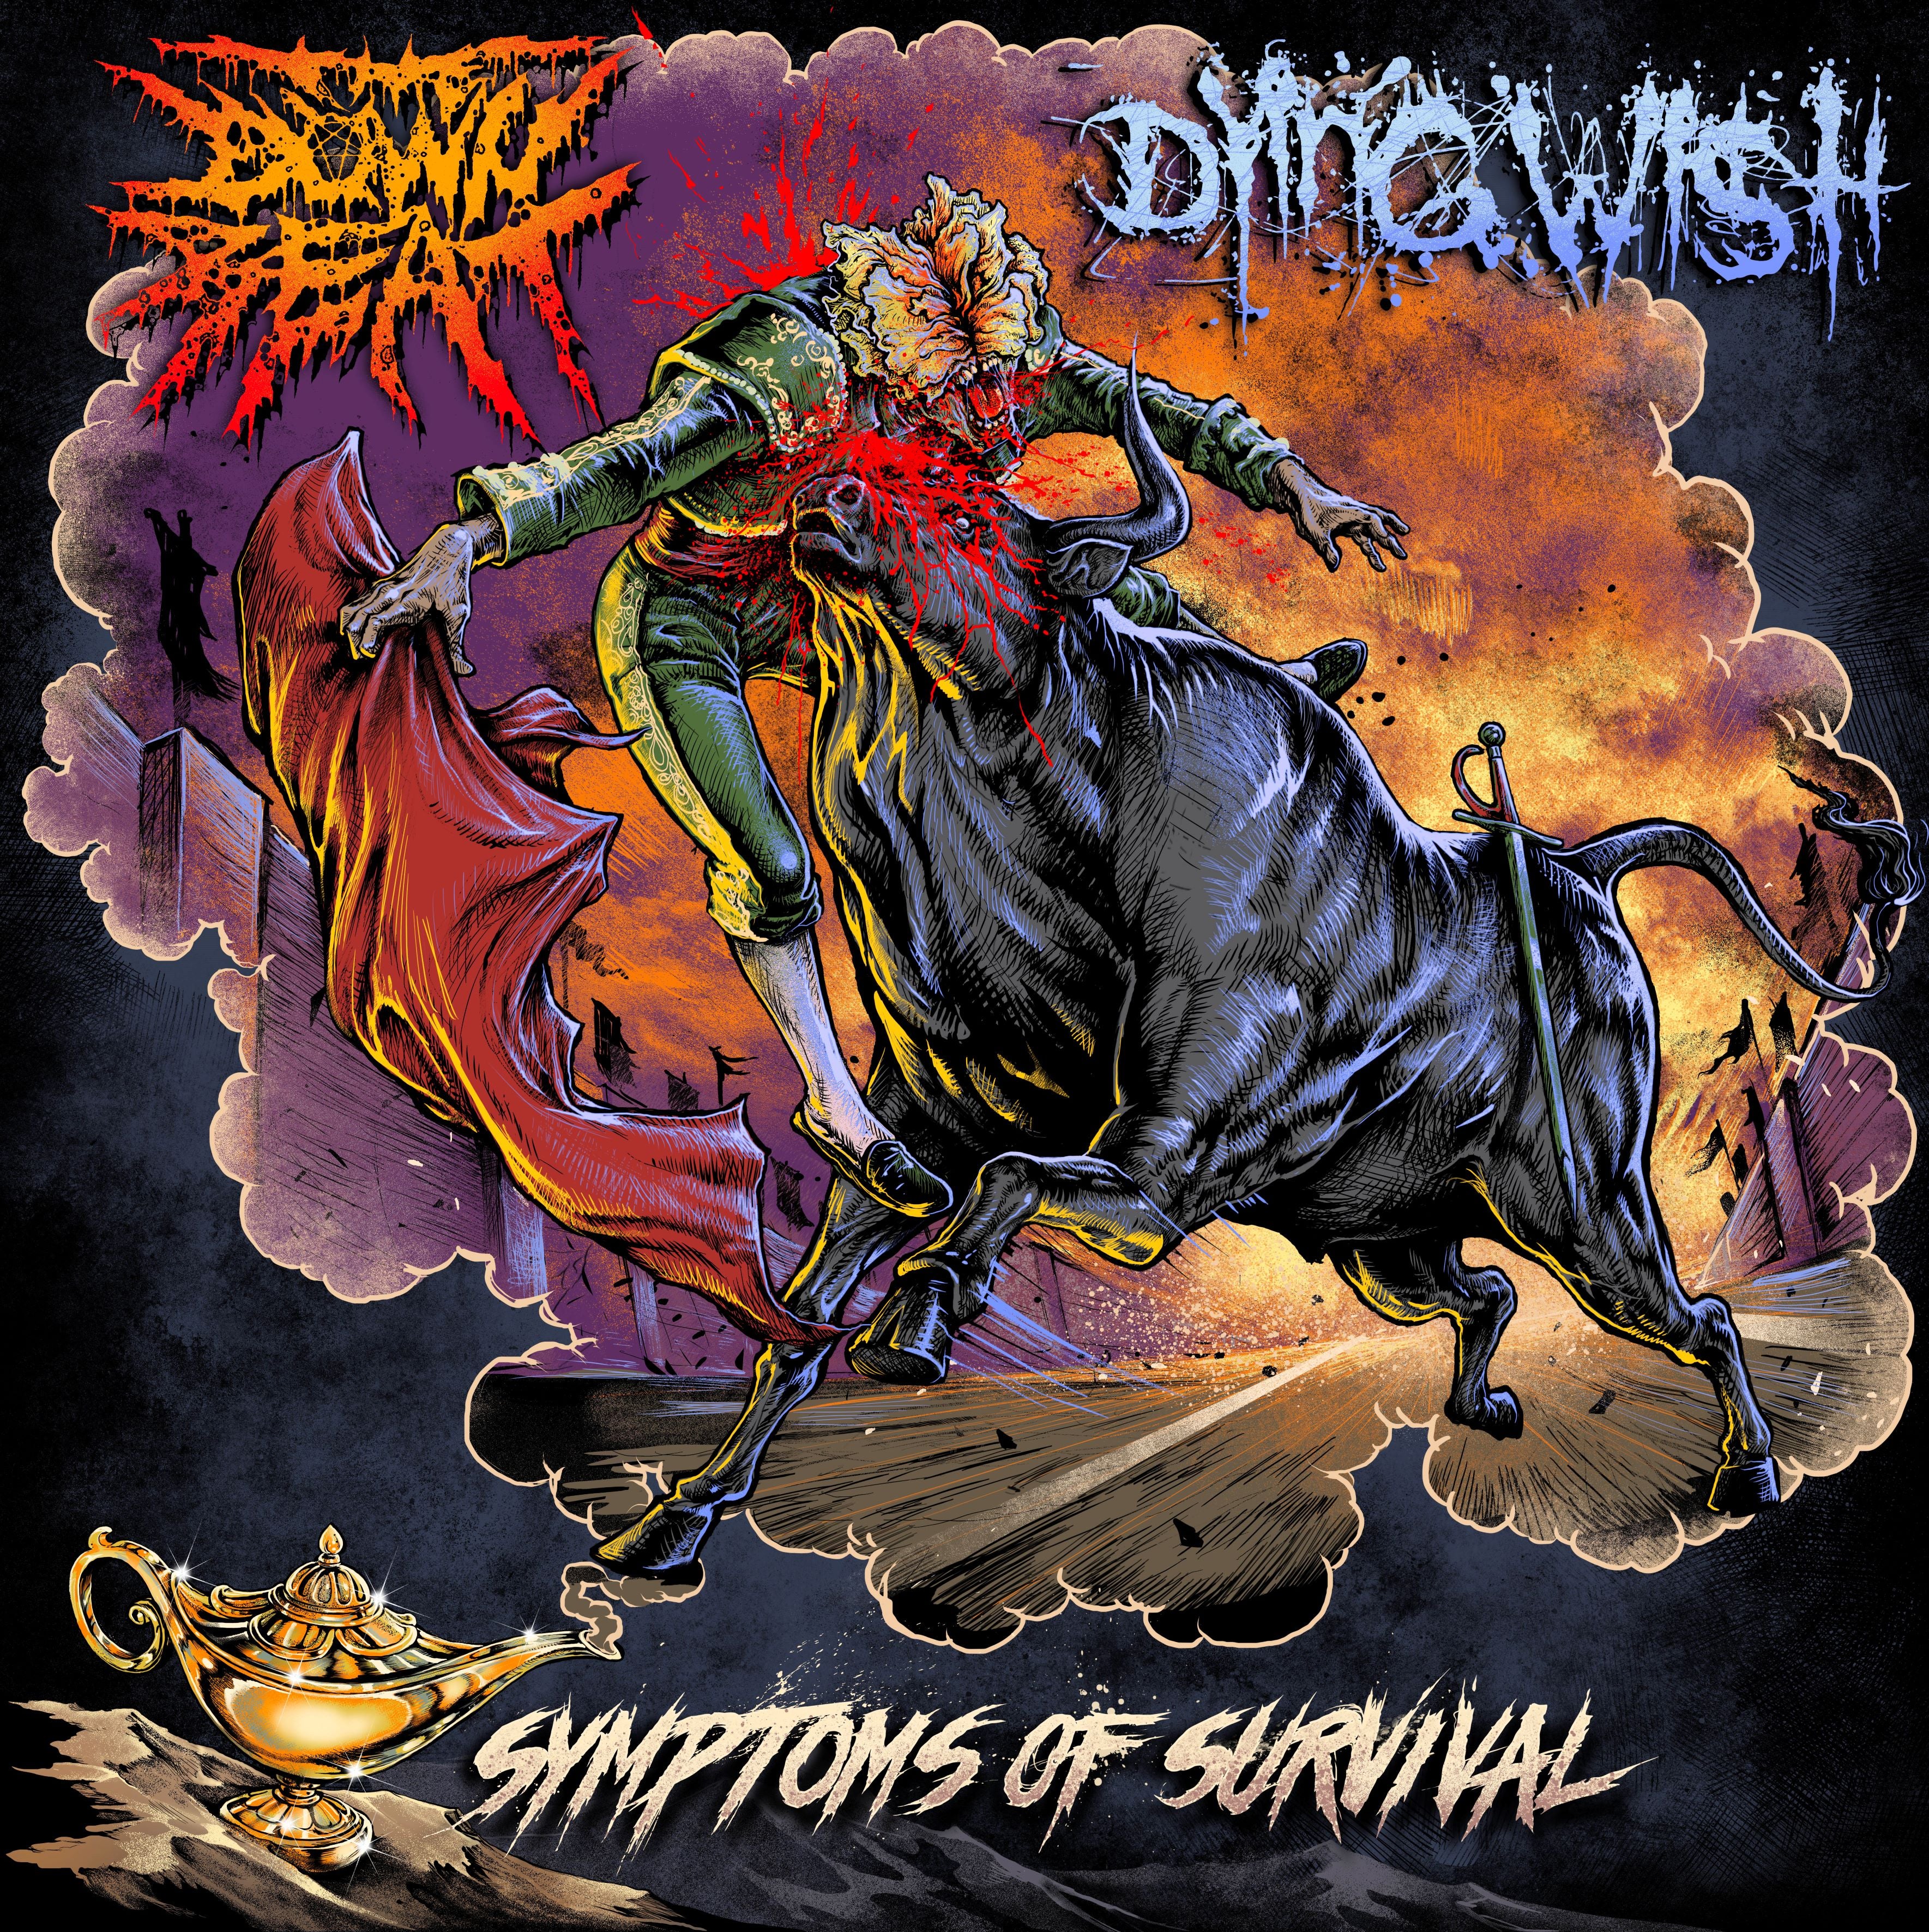 Symptoms of Survival 12" Vinyl - Downbeat X Dying Wish Collab - Limited to 500 Copies